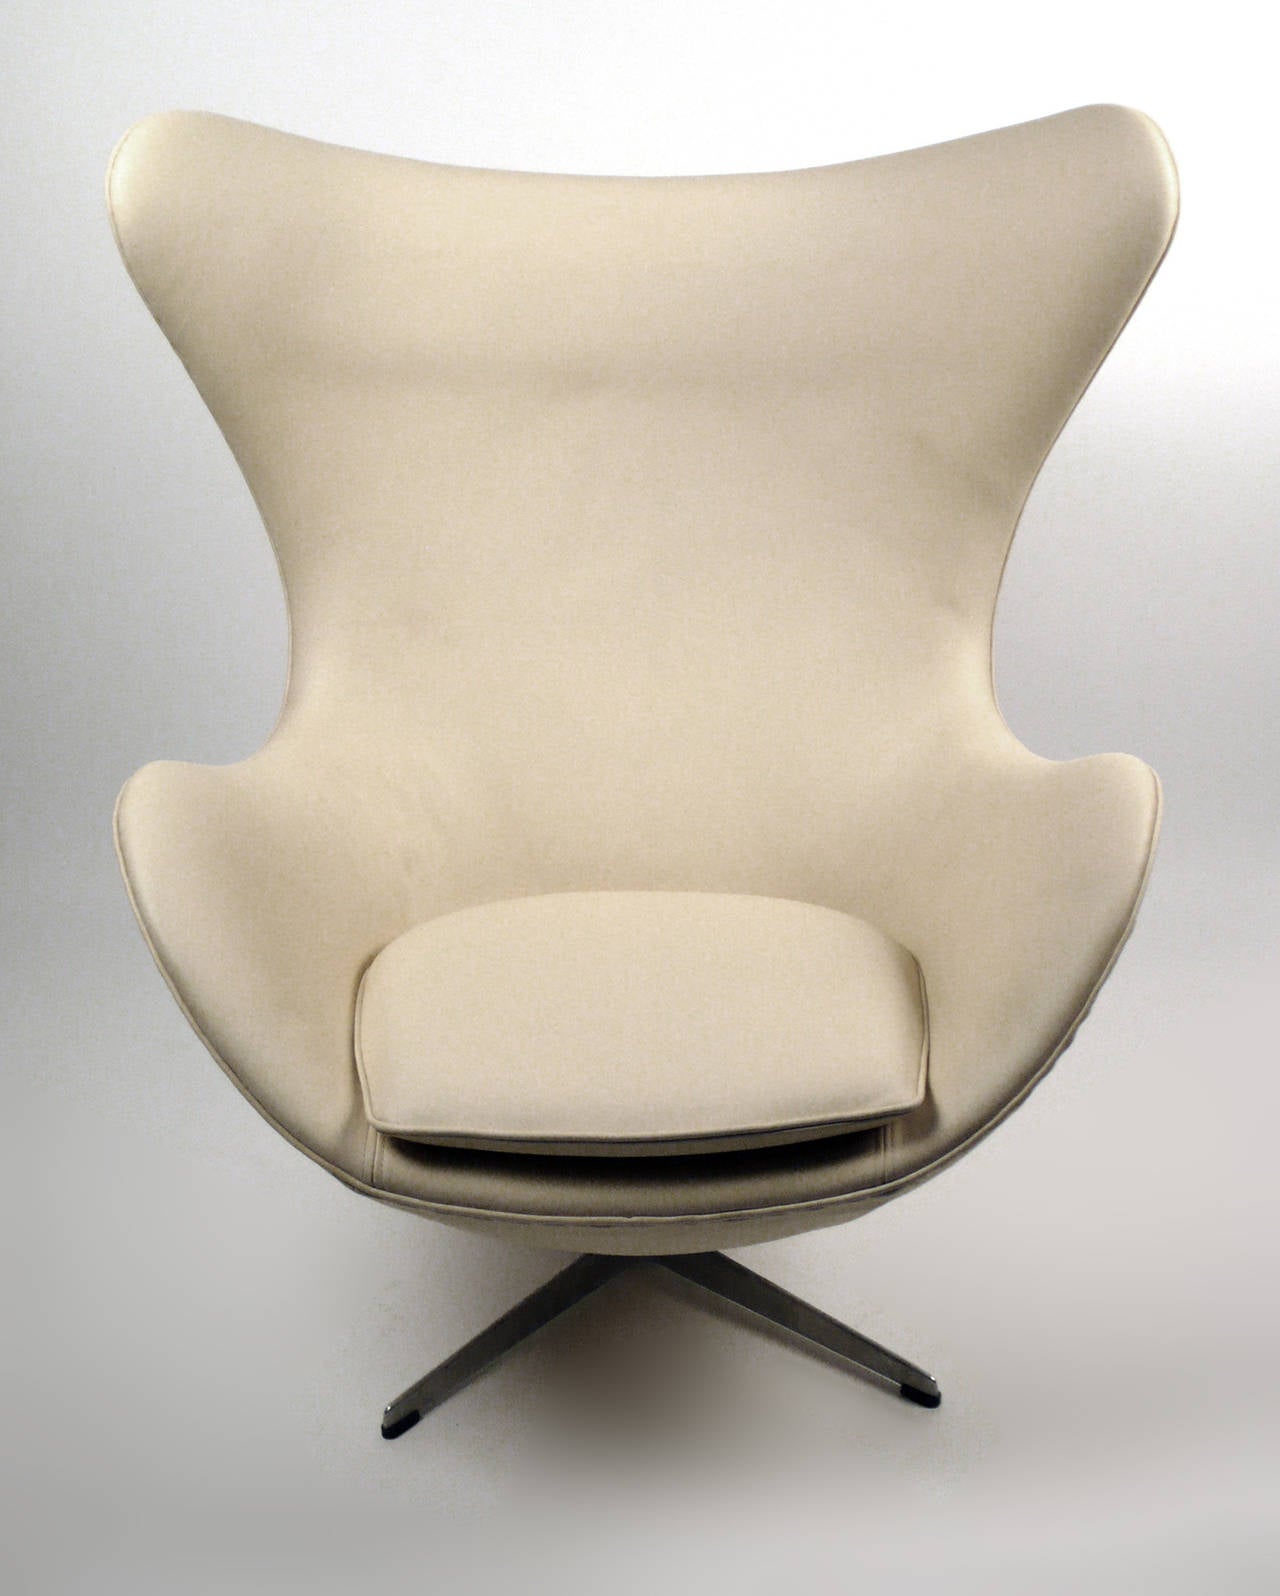 Mid-Century Modern Early Production Leather Egg Chair with Matching Ottoman by Arne Jacobsen